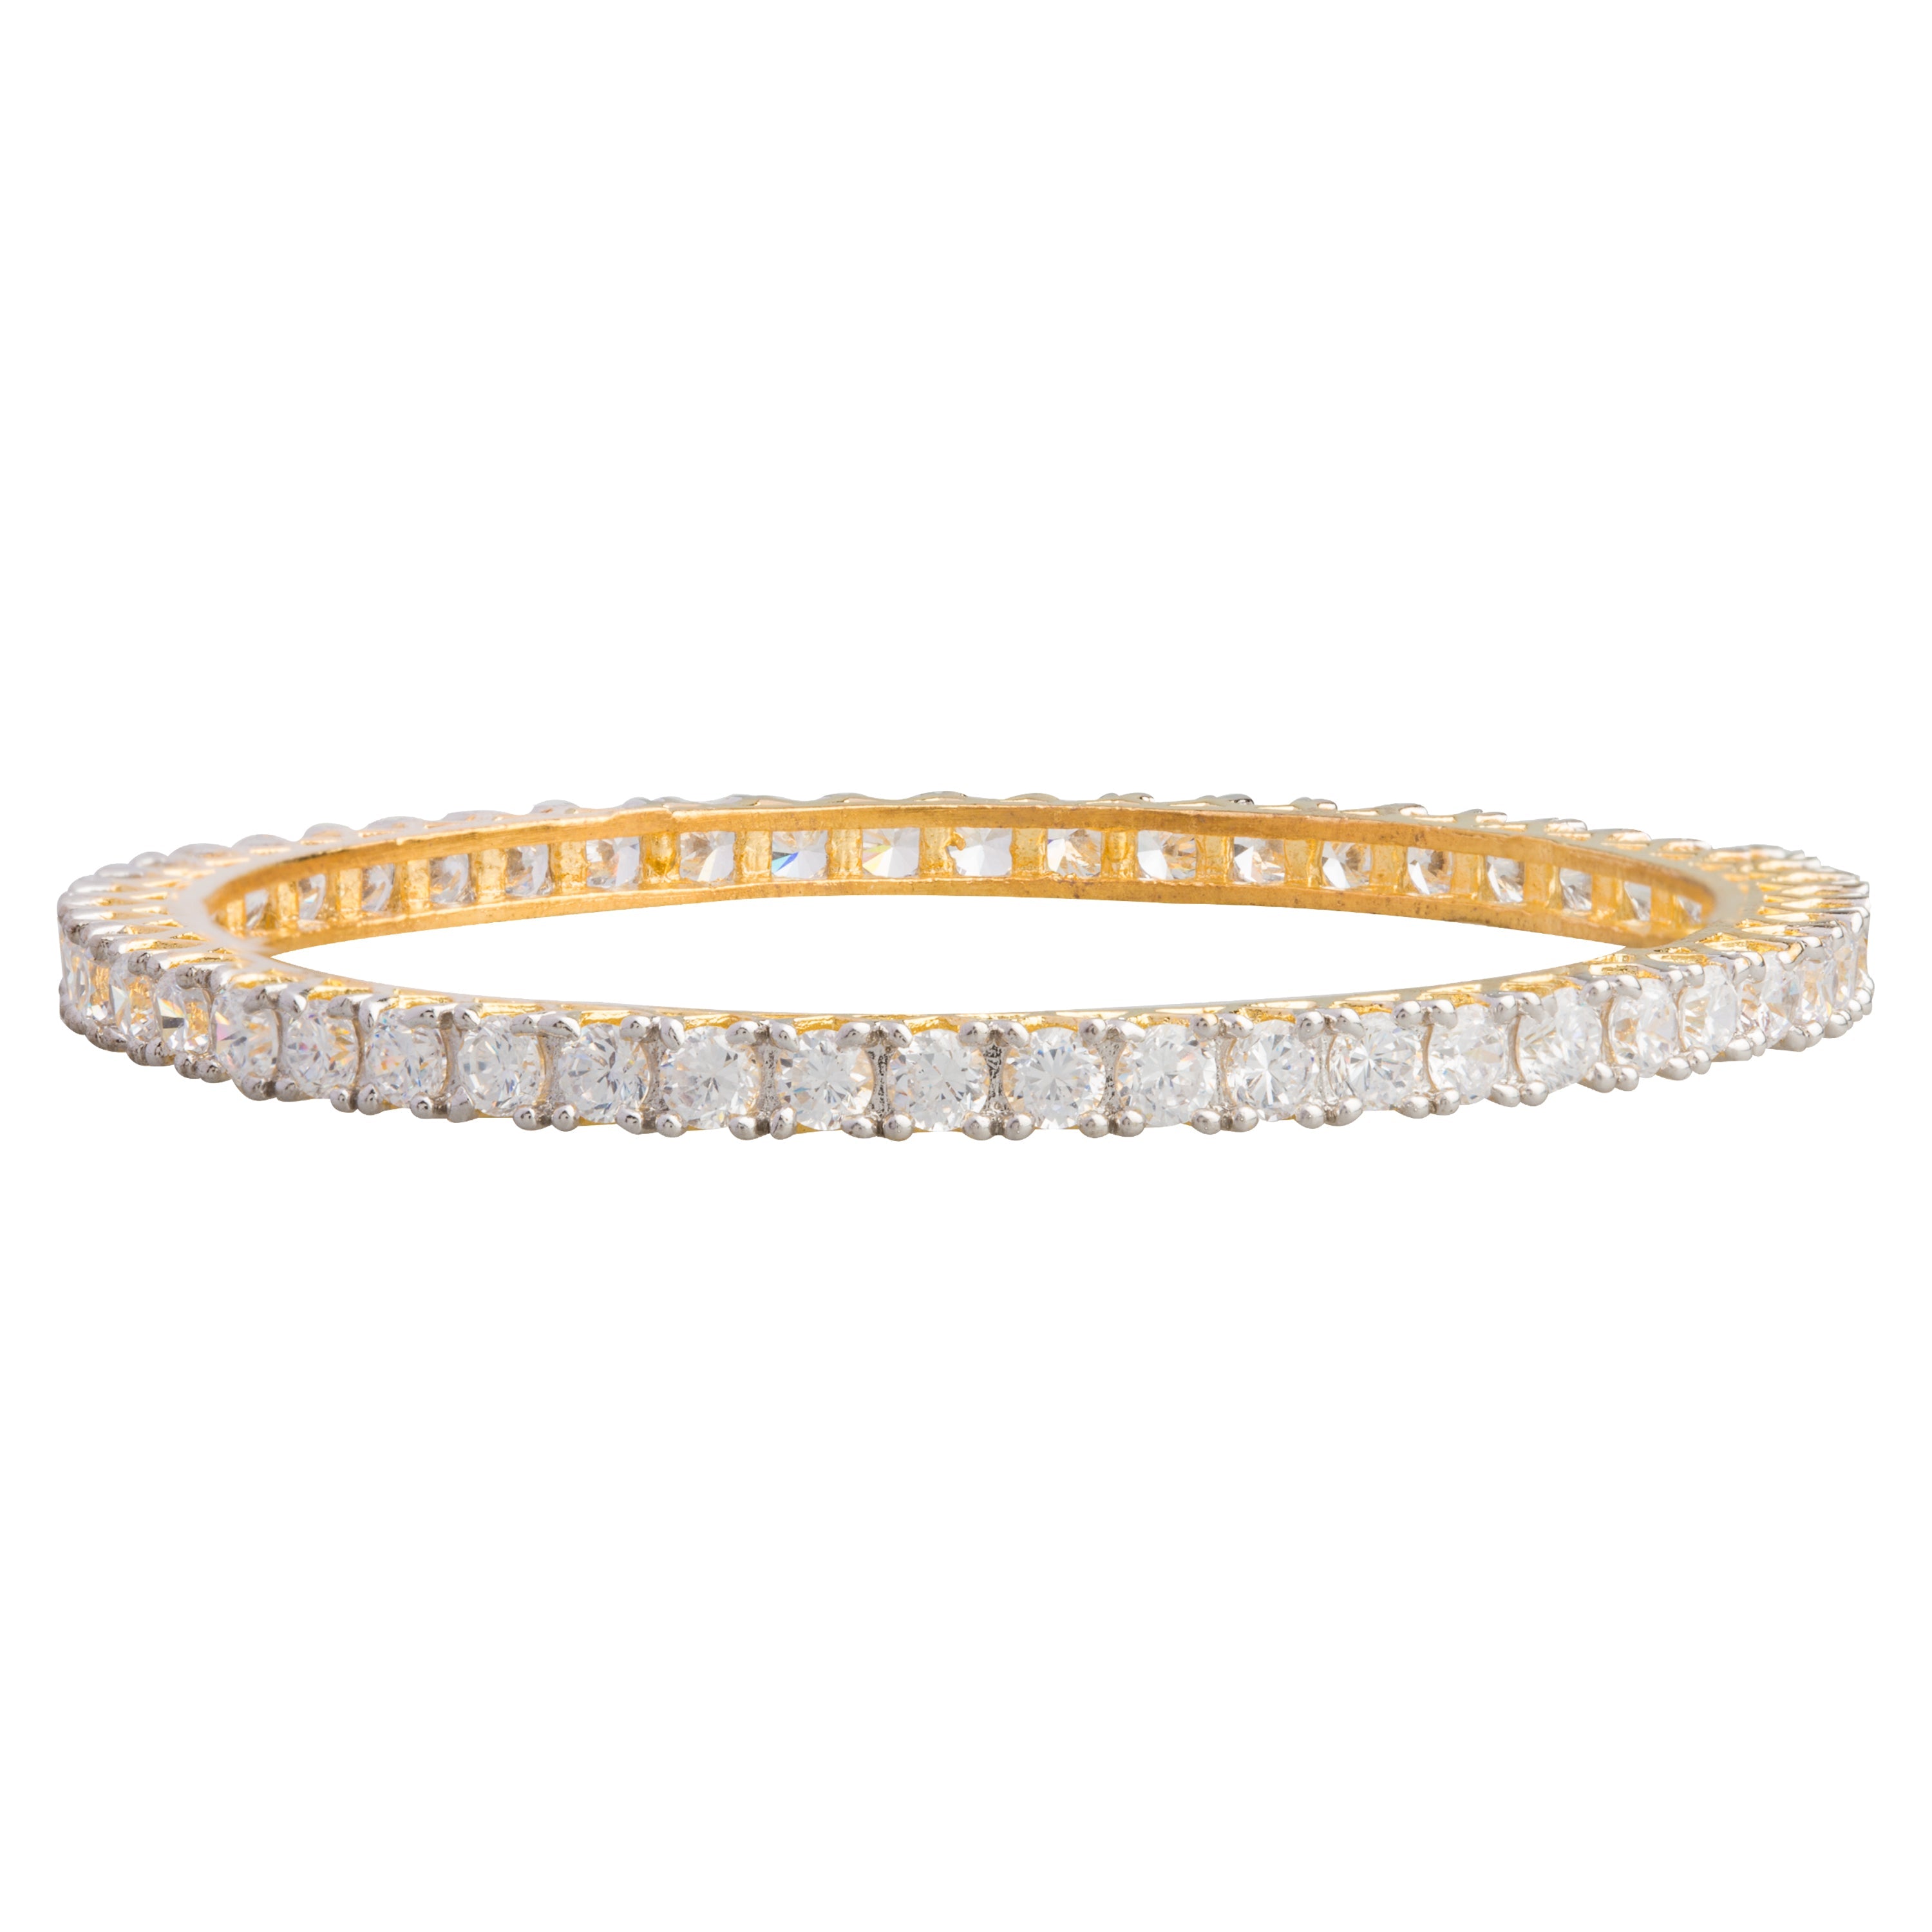 Hans Mart | Bracelets for Women Stylish White Gold Plated Crystal Solitaire  Bracelet Bangle Jewellery for Girls and Women